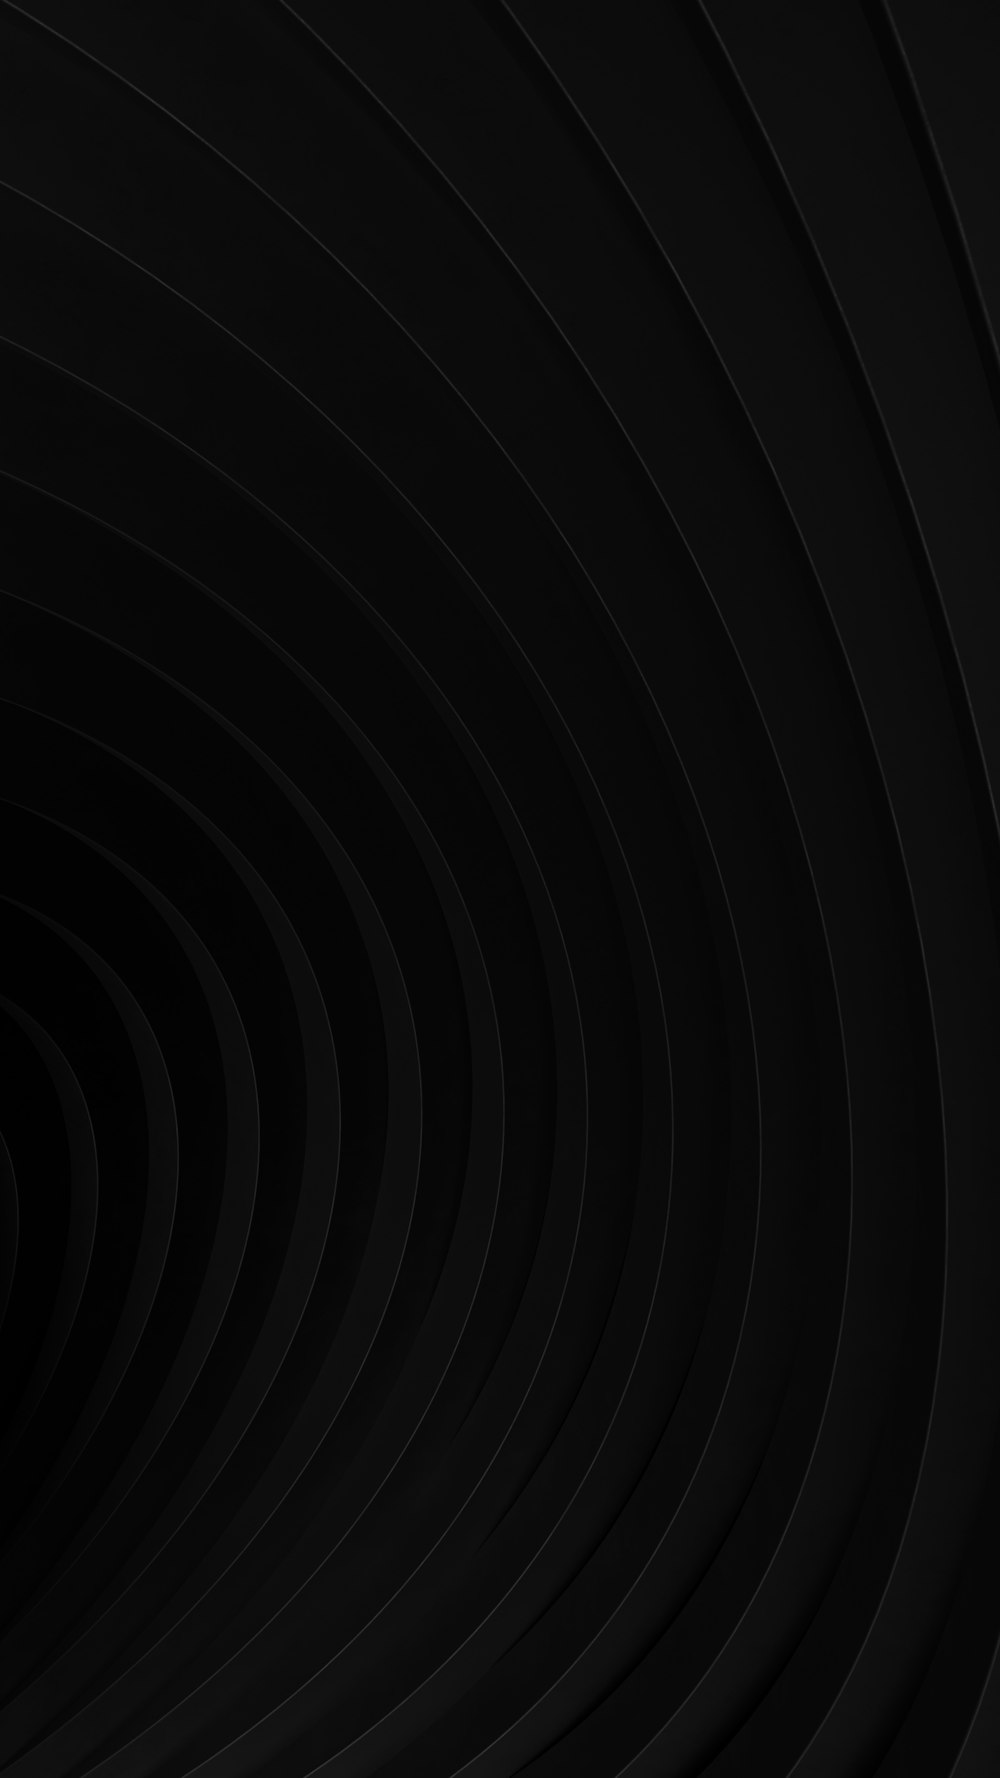 Black Amoled 4K Wallpapers - Black Abstract Wallpapers for iPhone